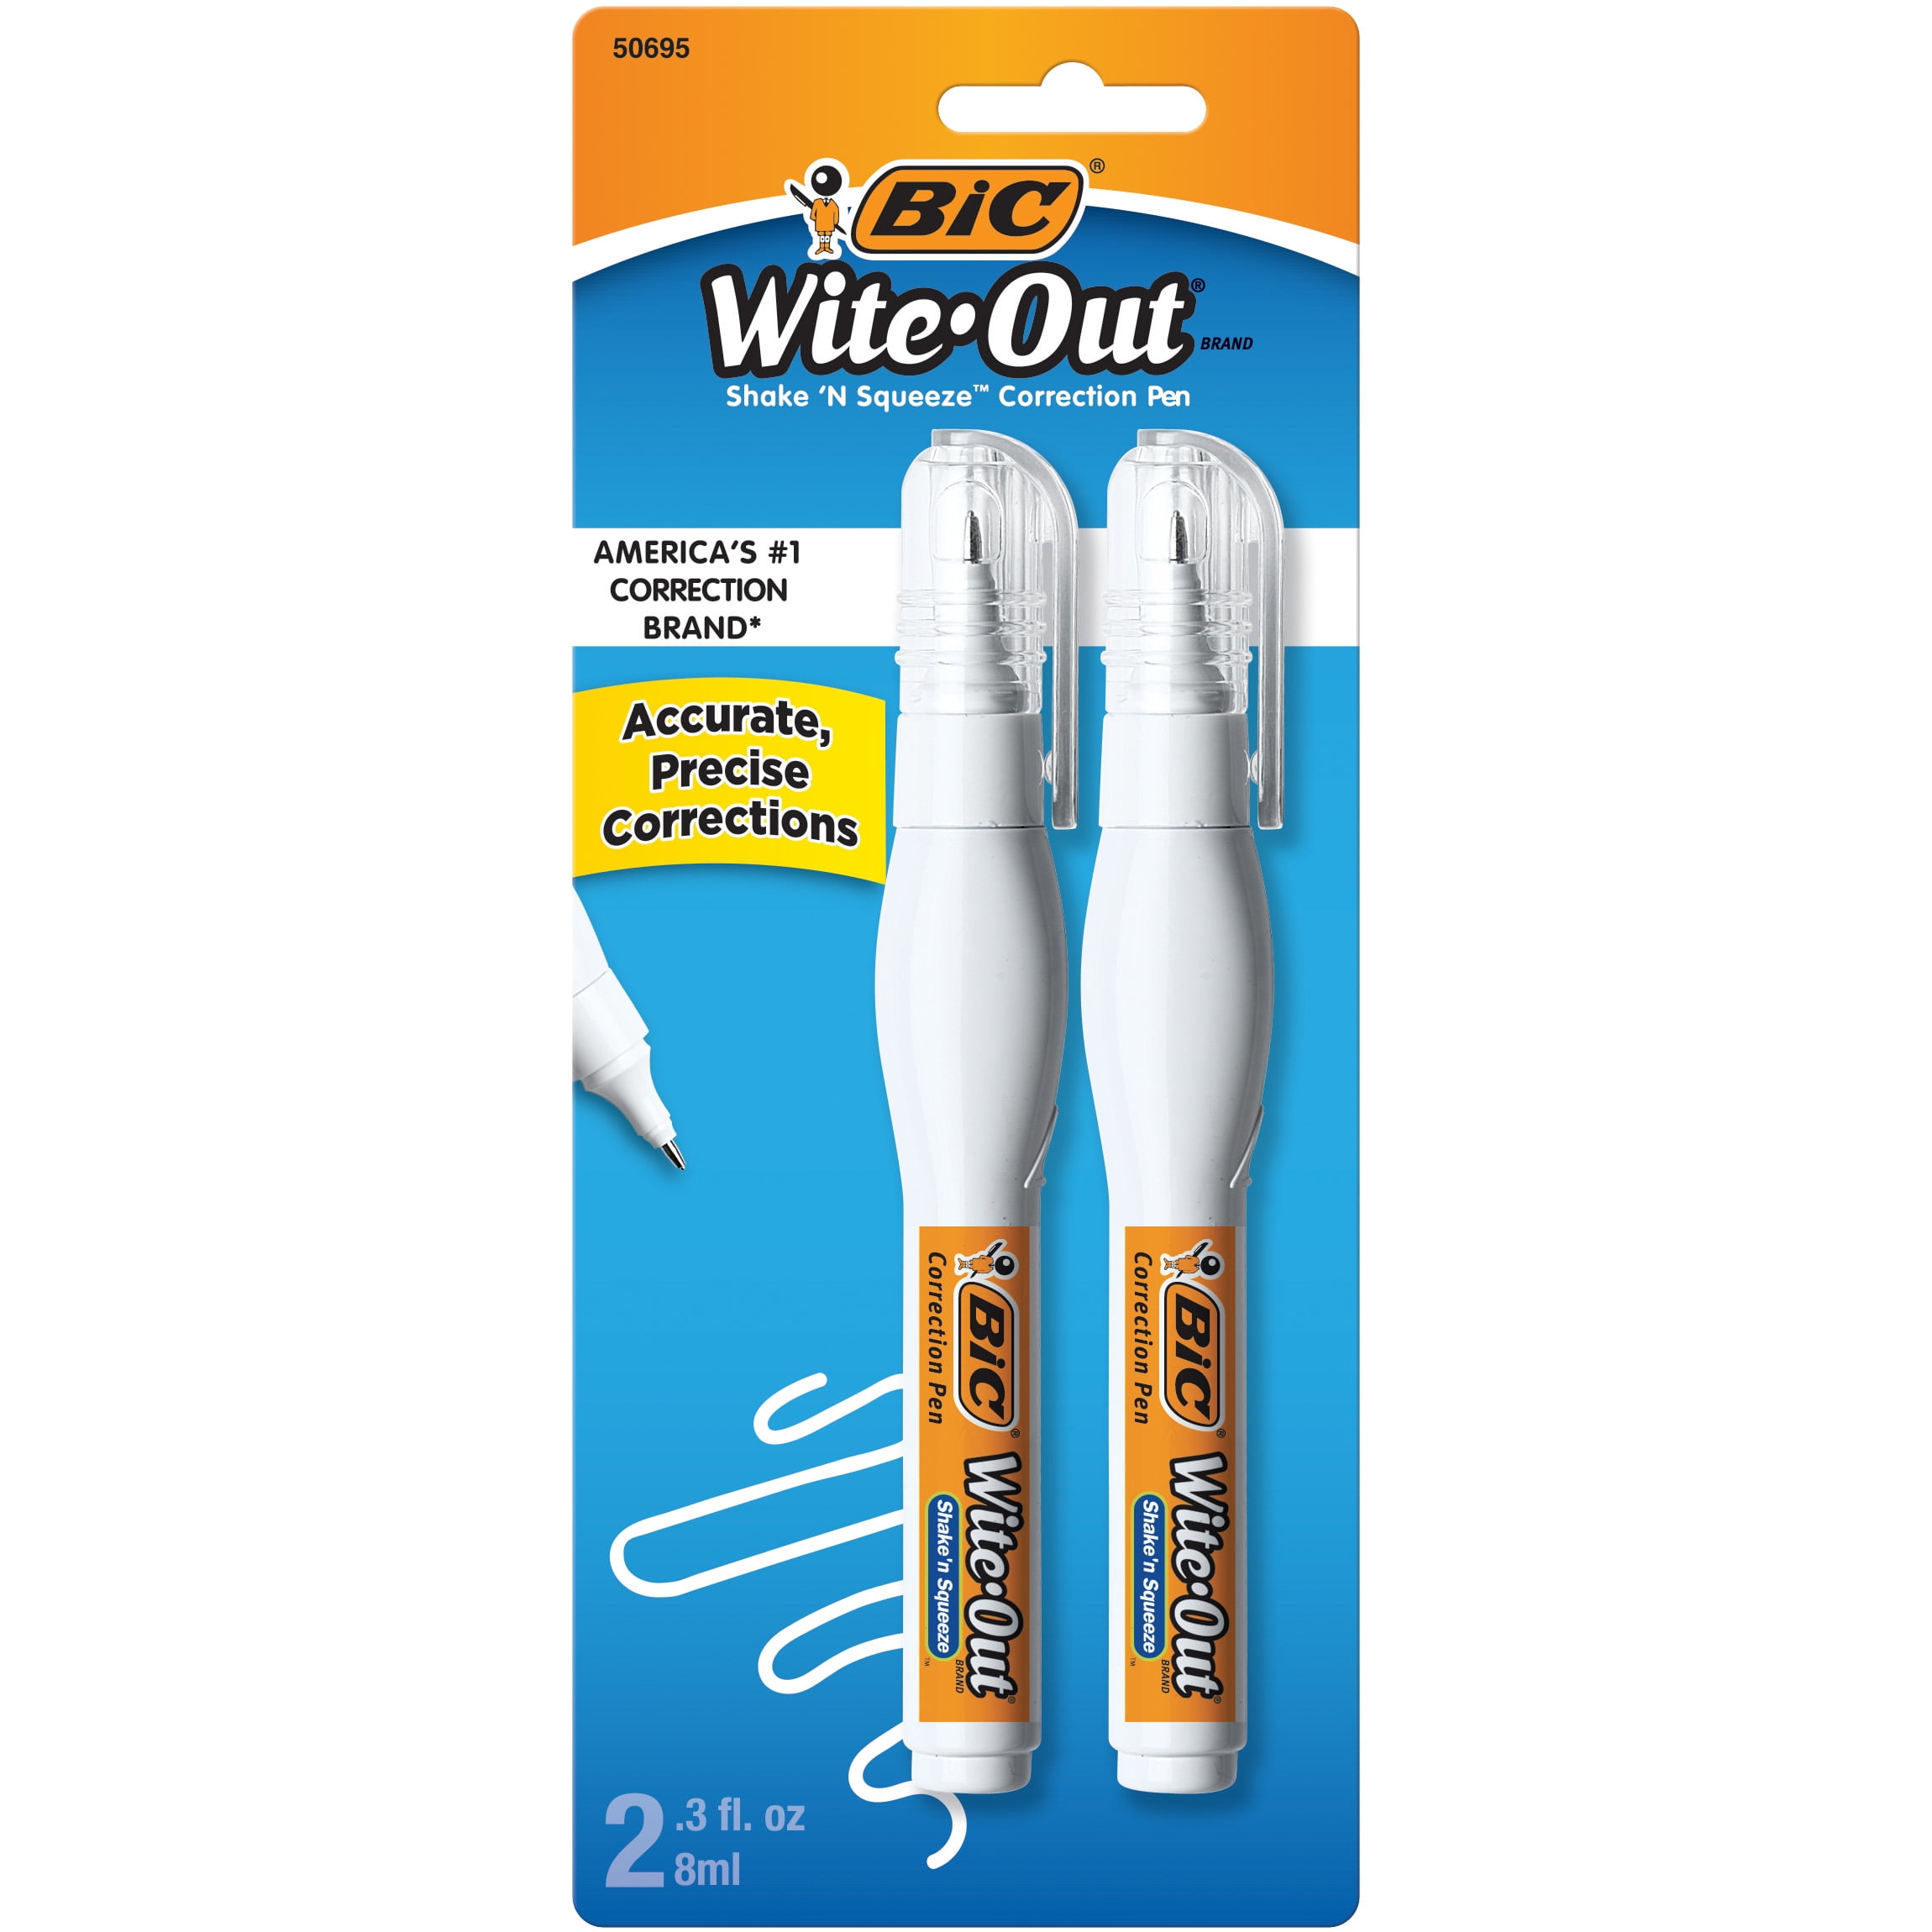 White Out Pen - Home Away From Home